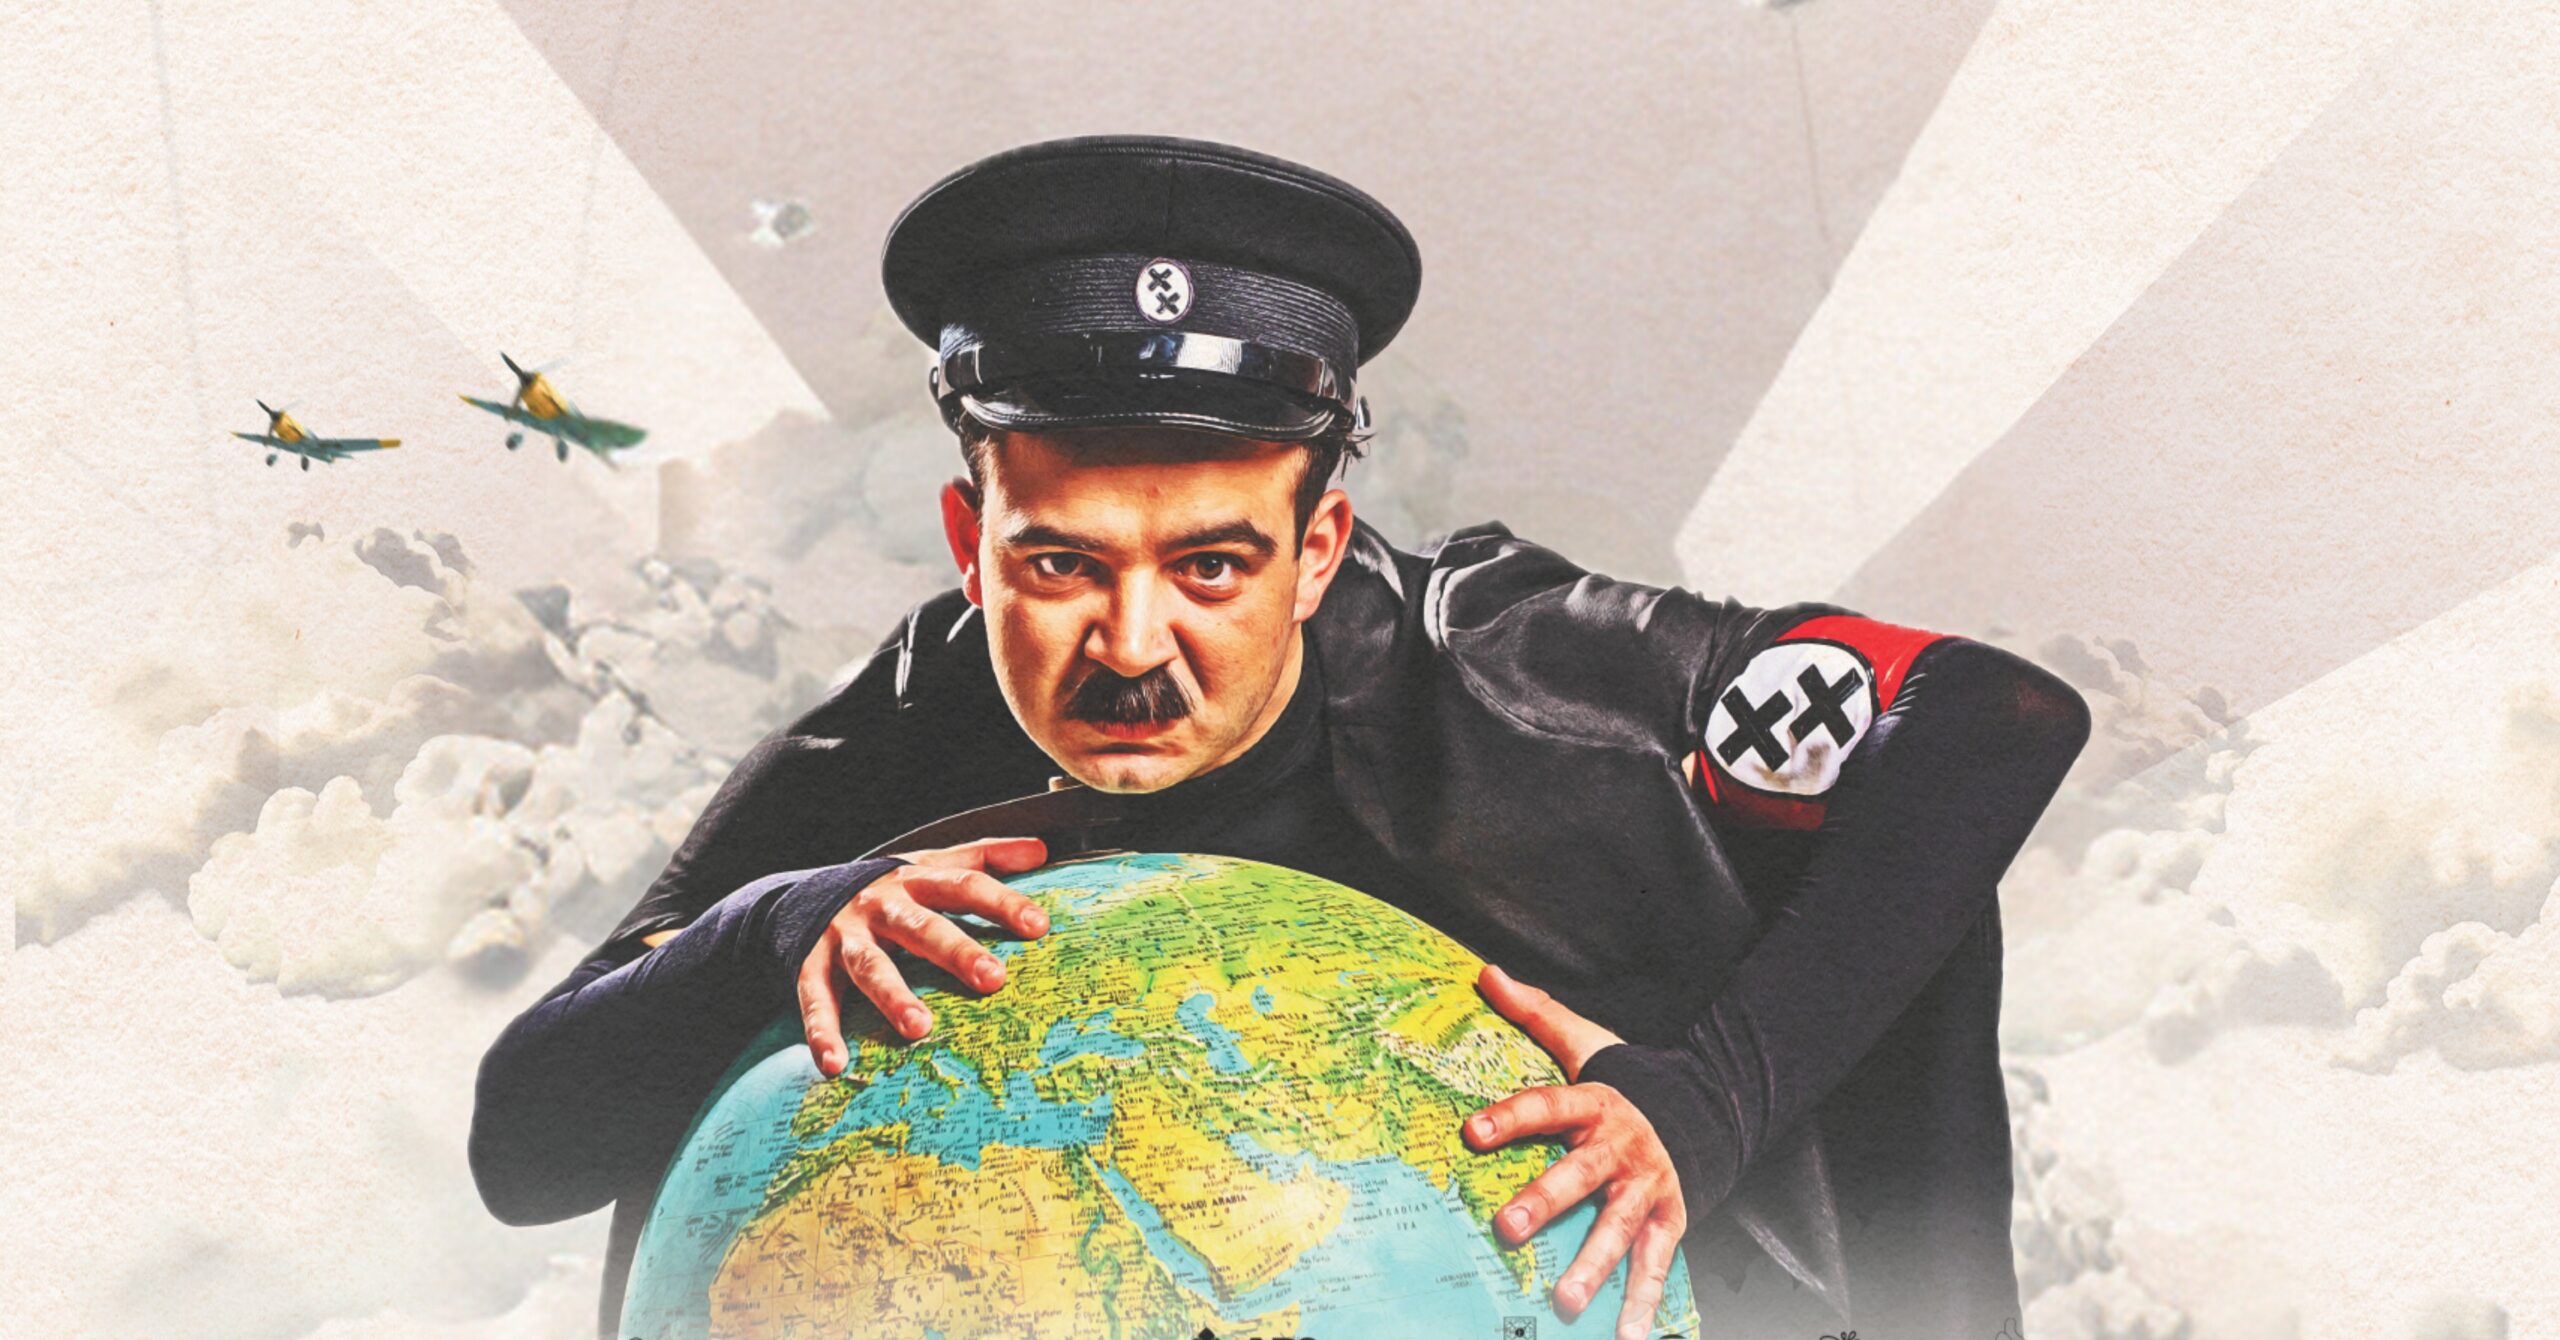 The Great Dictator Poster